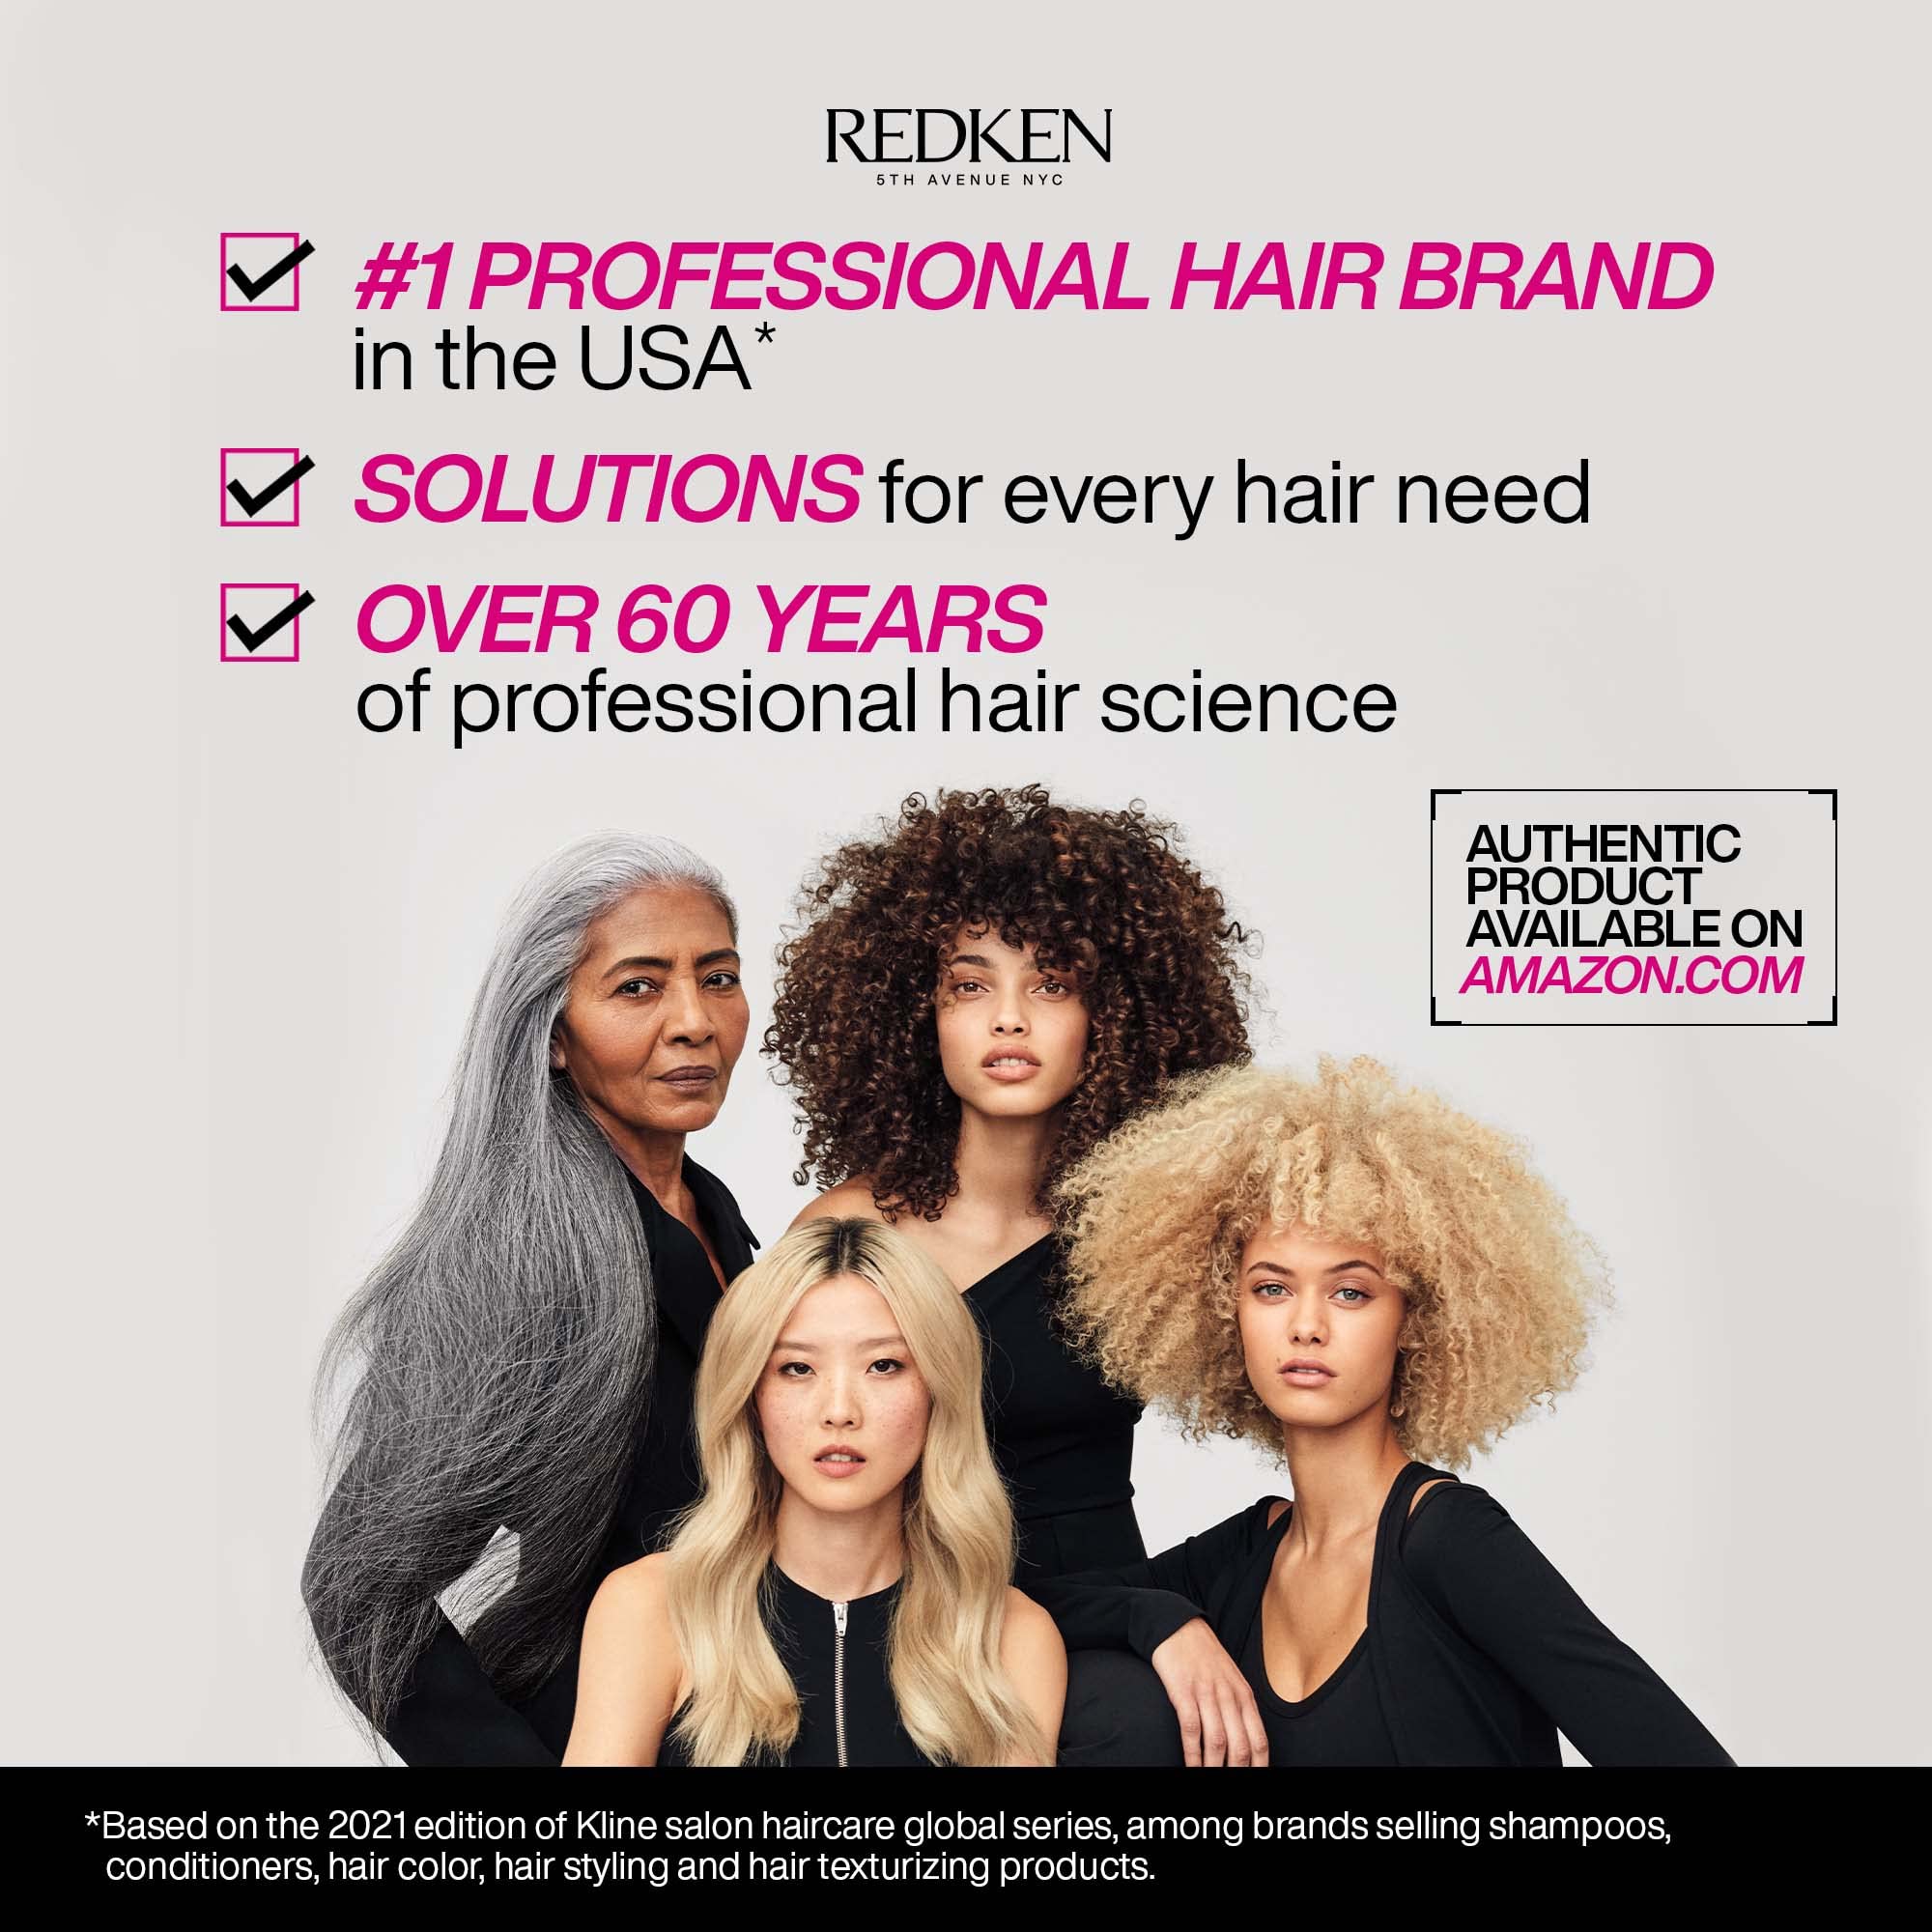 Redken Blondage Color Depositing Purple Shampoo | Neutralizes Brassy Tones In Blonde Hair | With Salicylic Acid | Cool and Ash Blonde Toning Shampoo | For Blonde, Bleached or Highlighted Hair